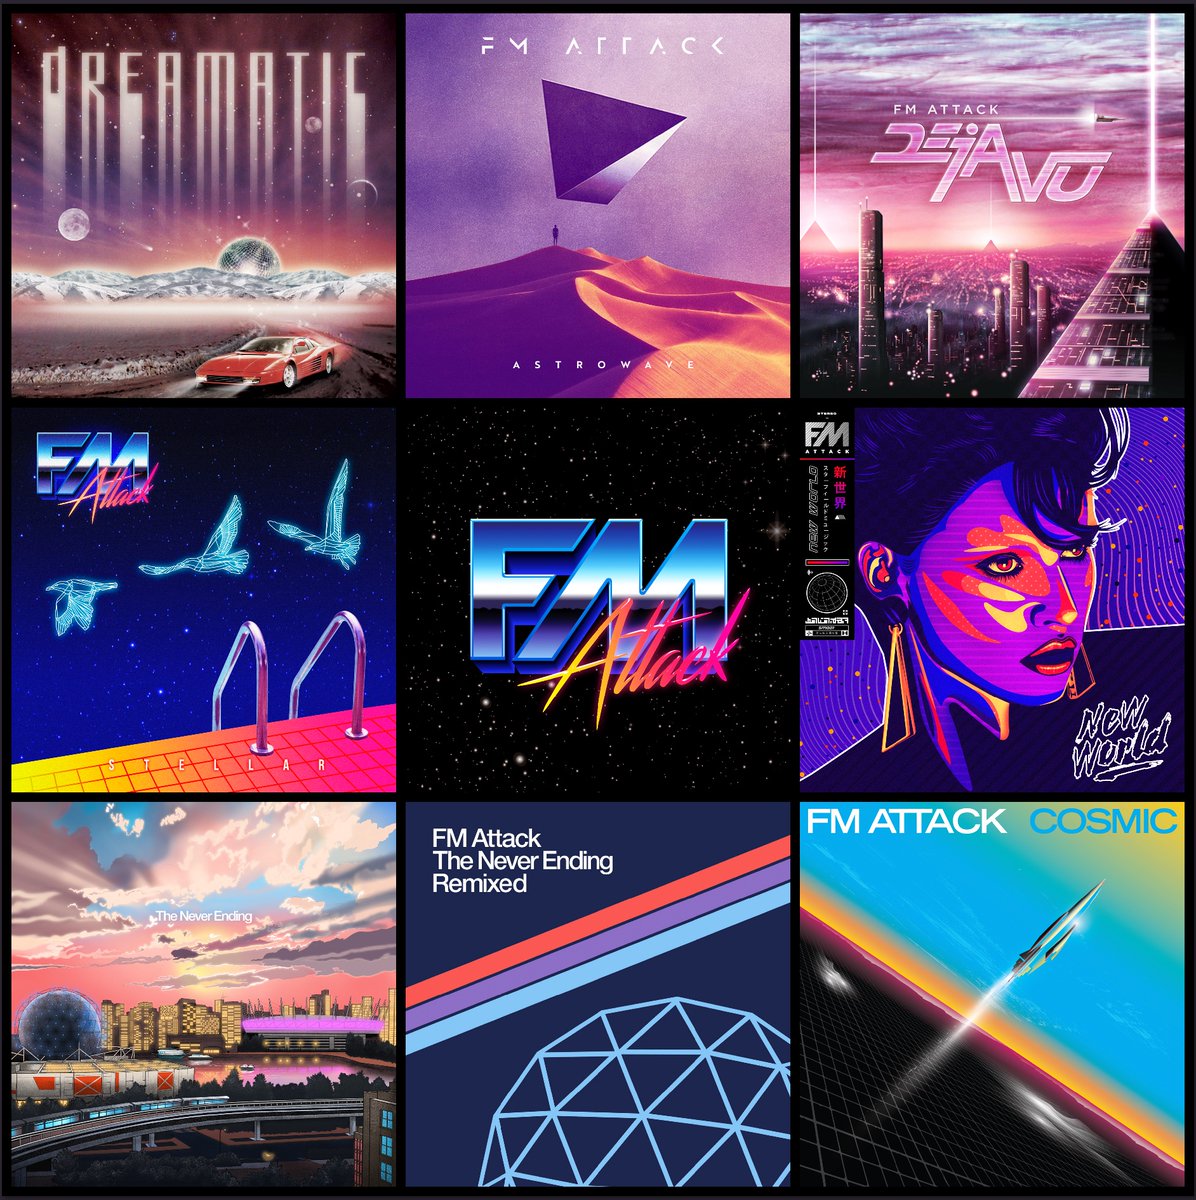 The Journey so far…✨ Which is your favourite? Dreamatic 2009 Astrowave EP 2010 Deja Vu 2013 Stellar 2017 New World 2019 The Never Ending 2021 The Never Ending Remixed 2022 Cosmic 2023